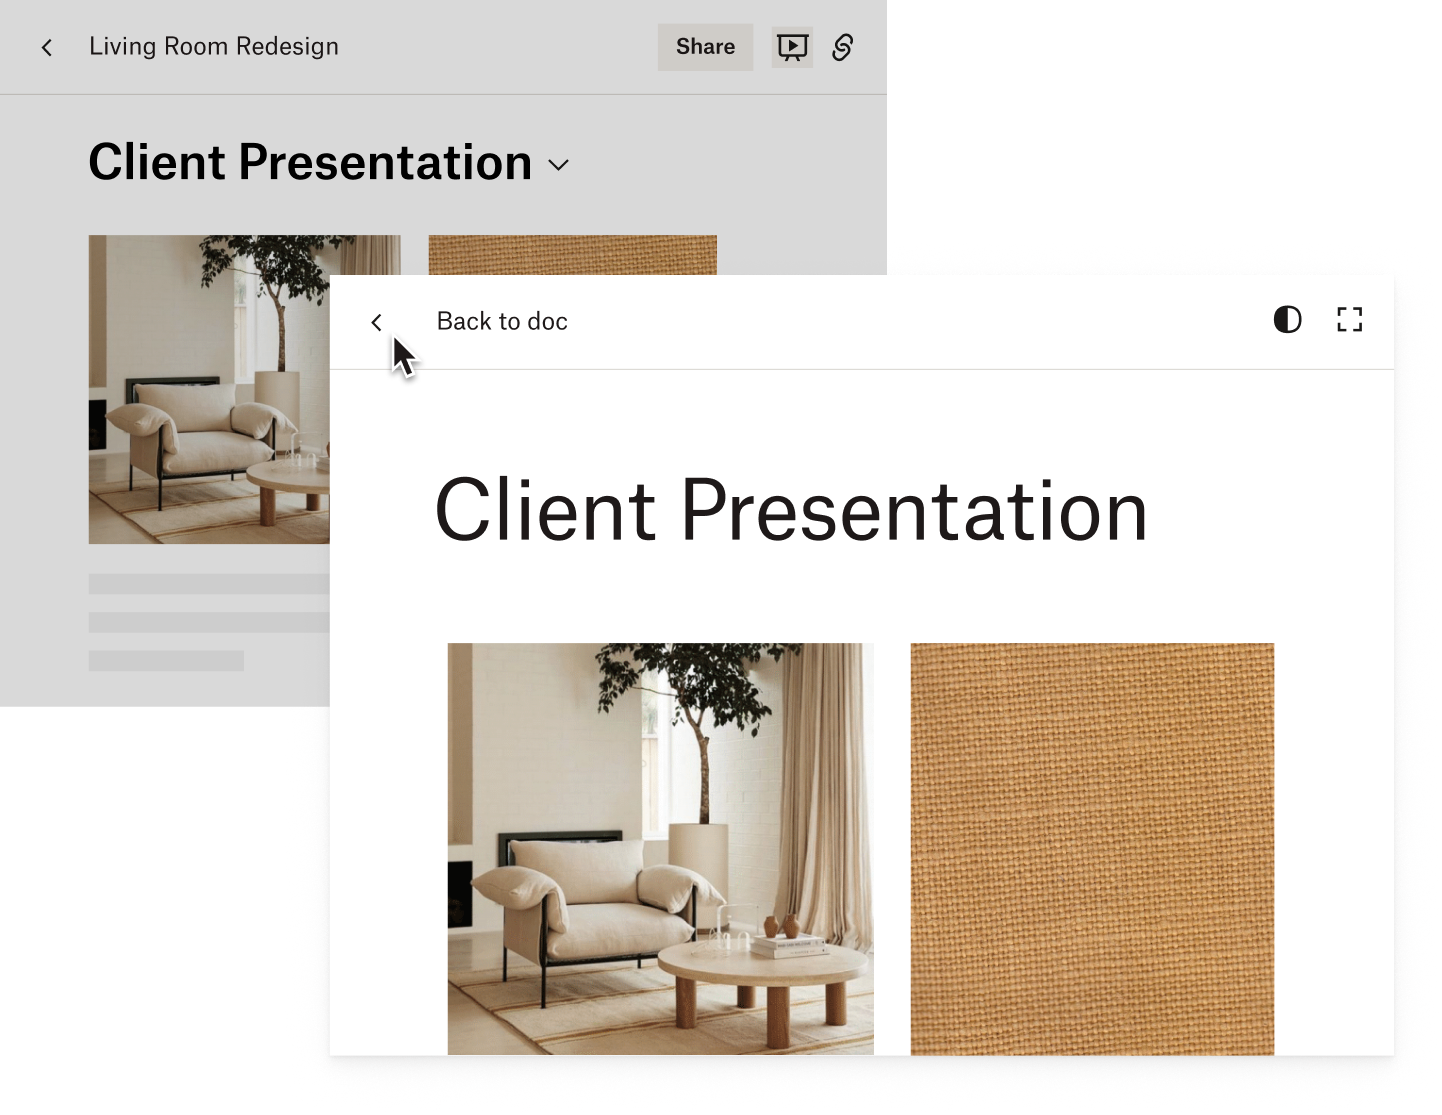 A user presenting their living room redesign presentation in Dropbox Paper